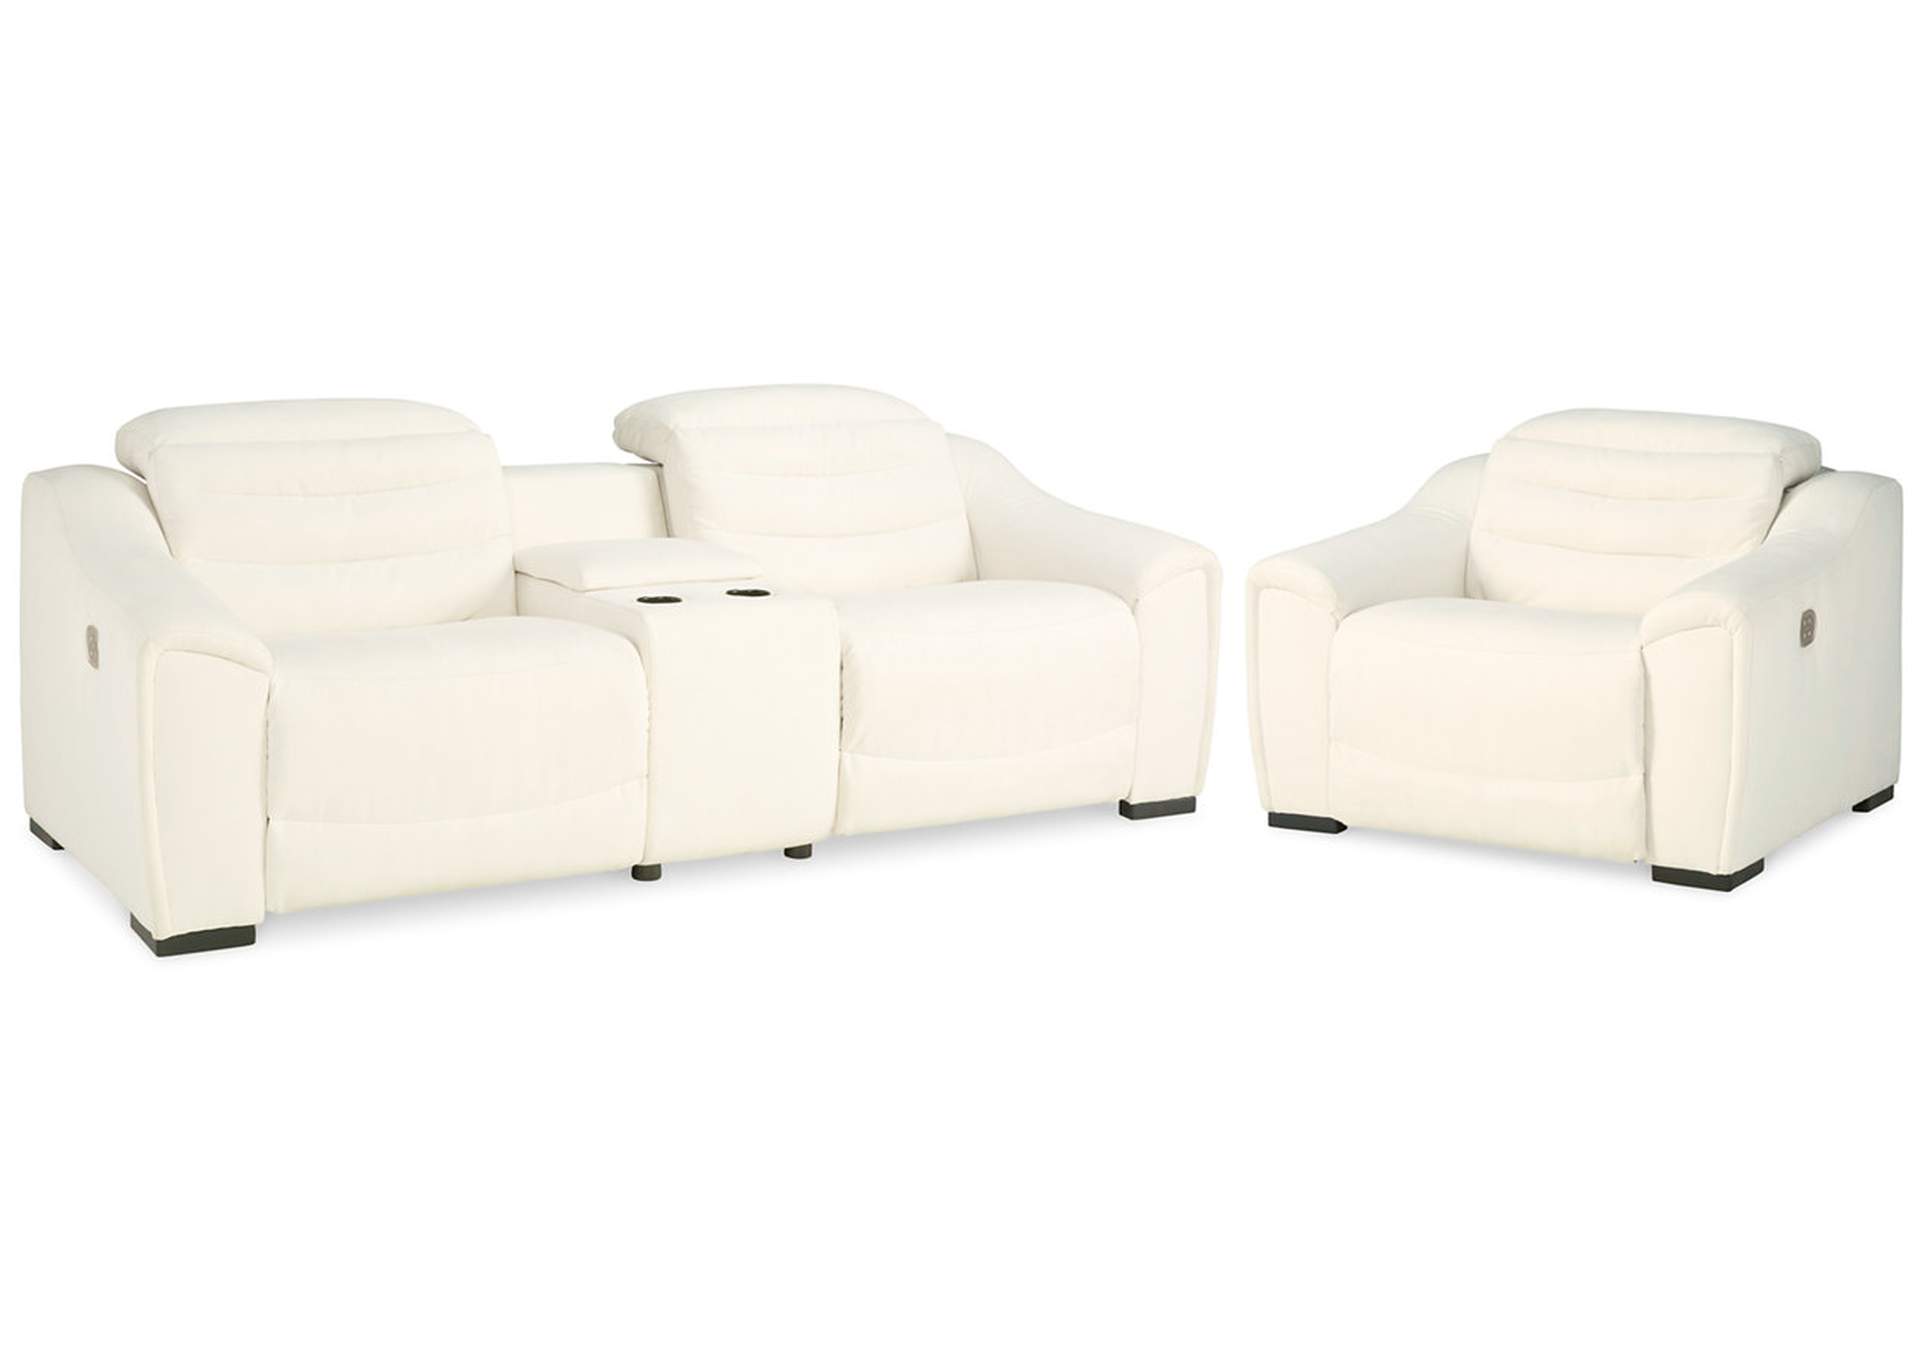 Next-Gen Gaucho 3-Piece Sectional with Recliner,Signature Design By Ashley